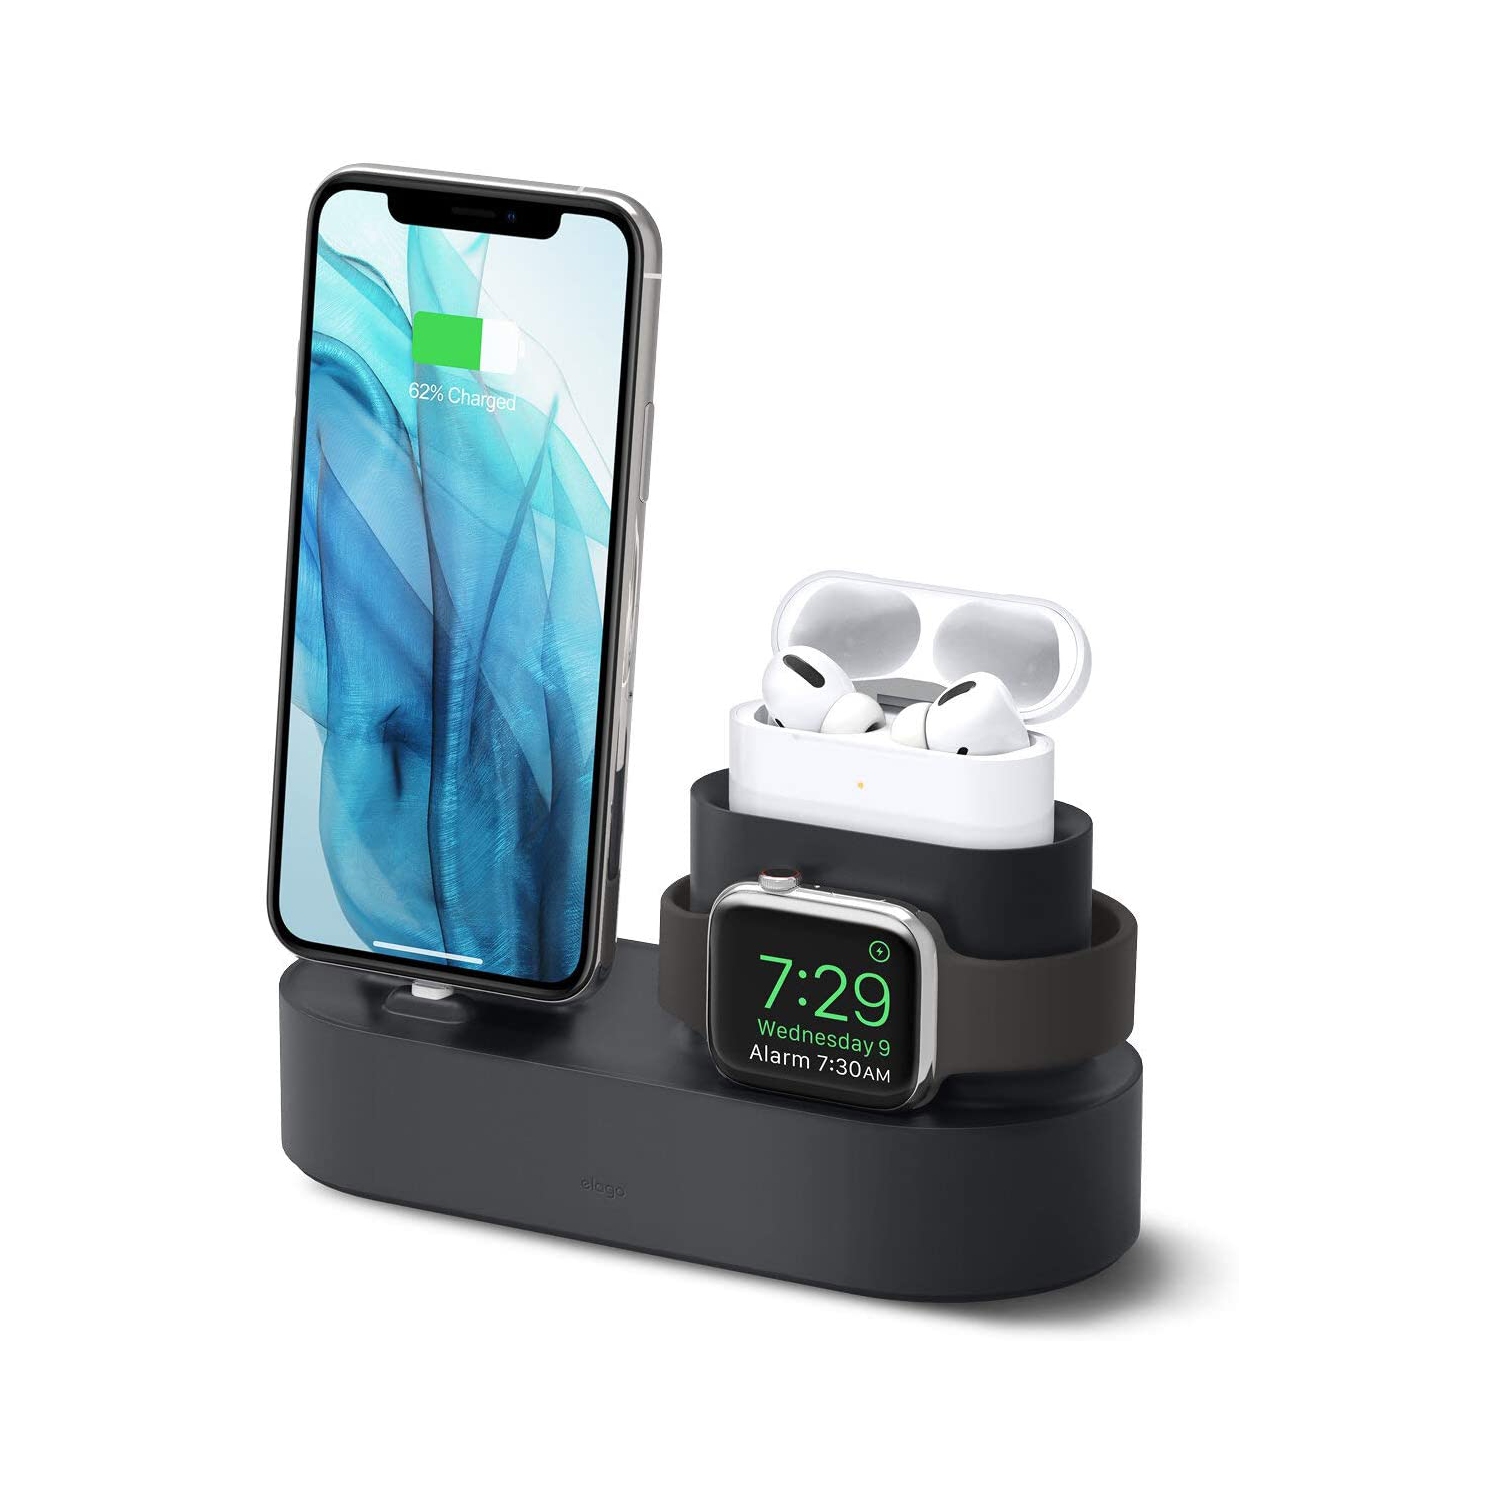 elago 3 in 1 Charging Stand [Black] - Compatible with All Apple Watch Series, AirPods Pro, iPhone 11 Pro Max, 11 Pro